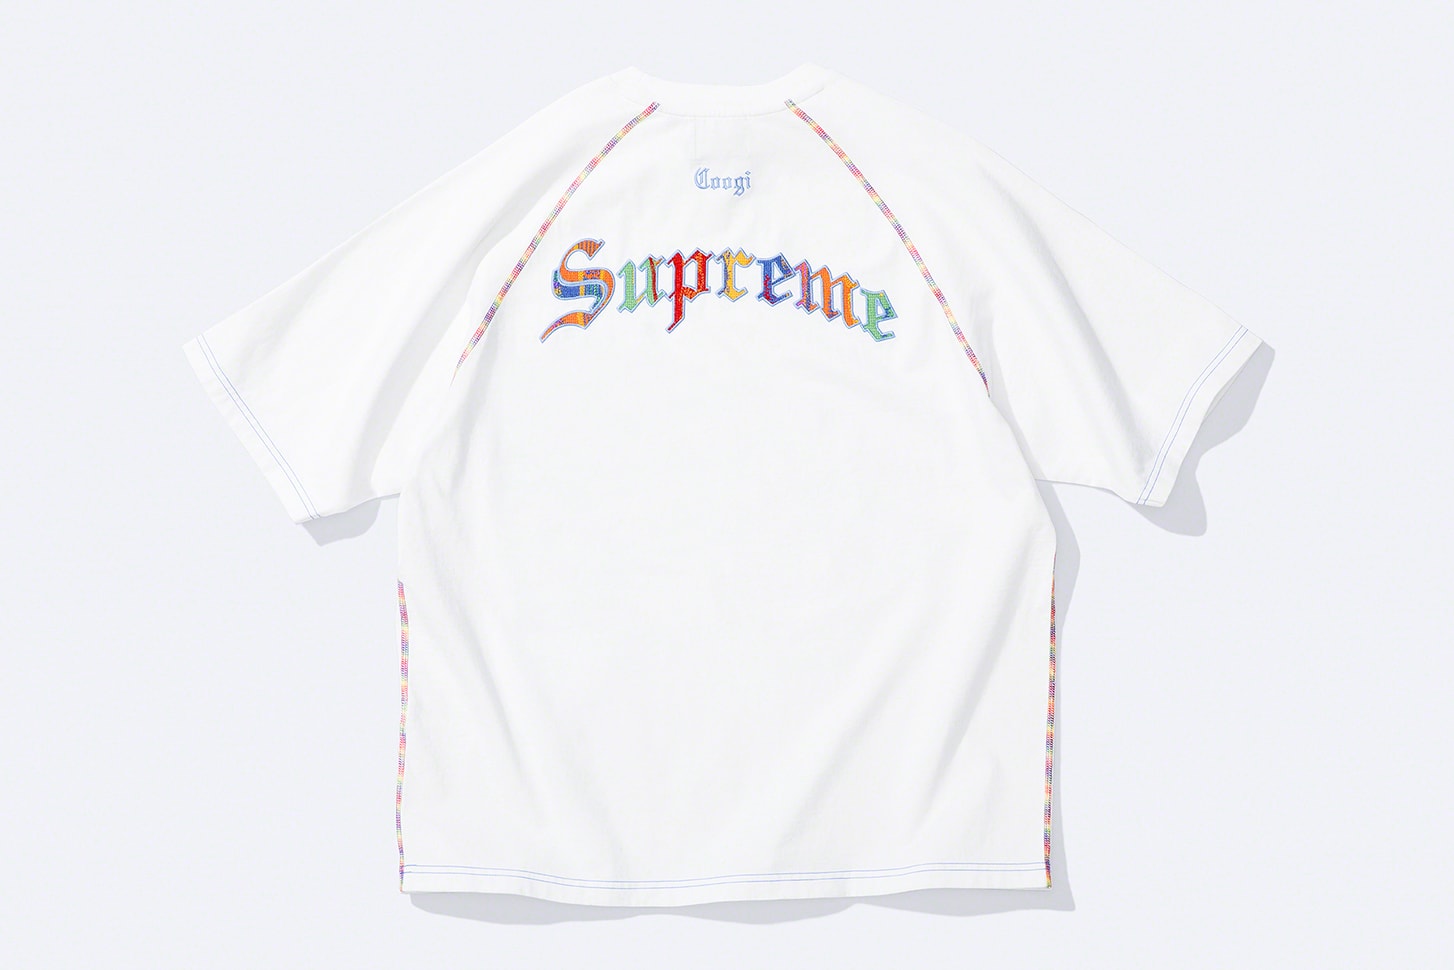 Supreme white jersey shirt in 2023